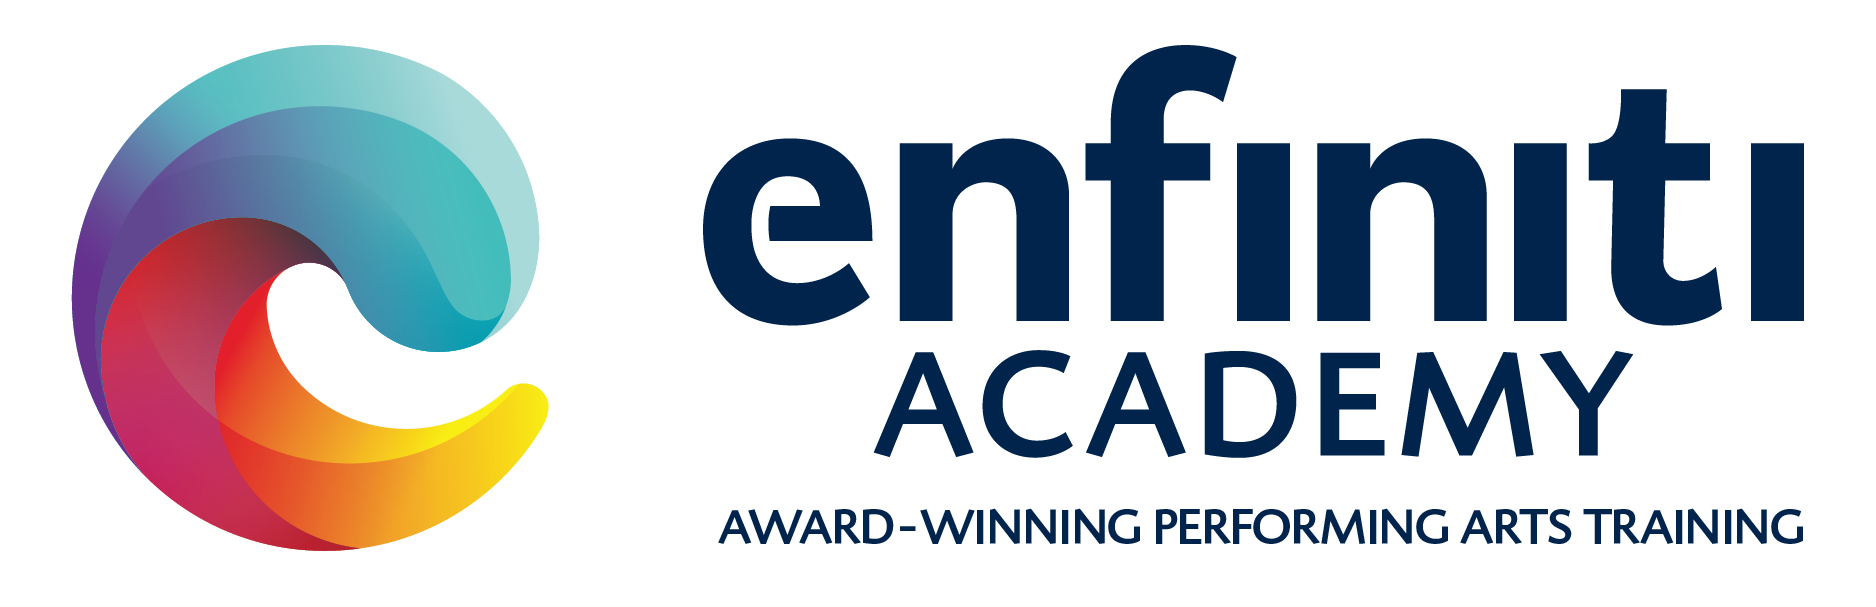 Enfiniti Academy of Performing Arts